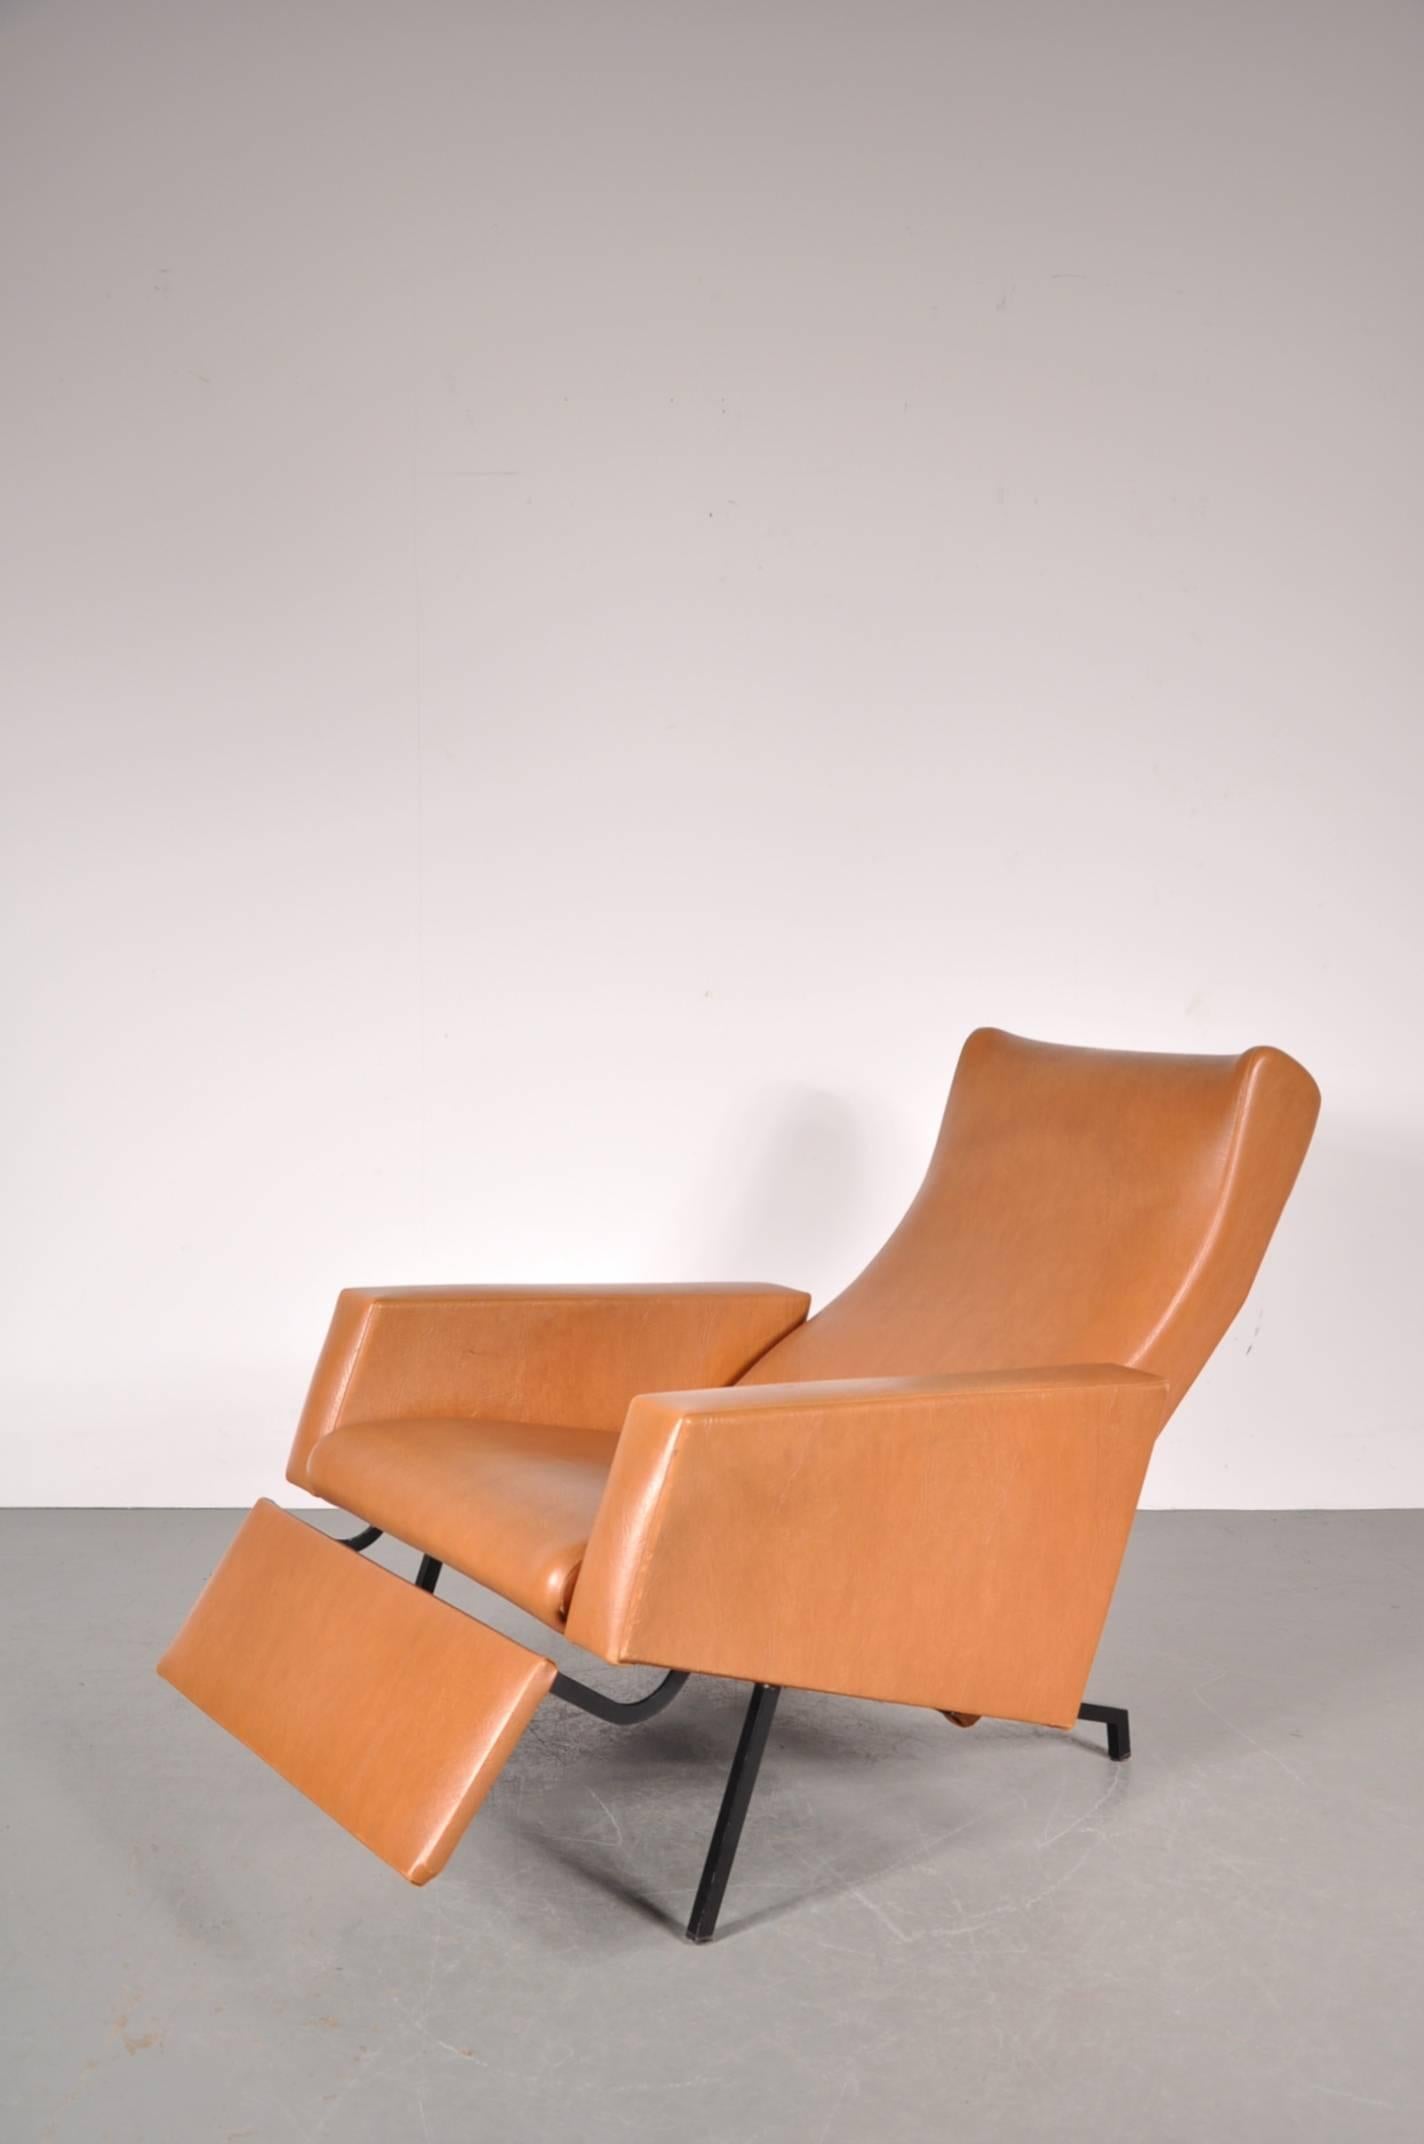 Mid-20th Century Trelax Chair by Pierre Guariche, Manufactured by Meurop, Belgium, circa 1950